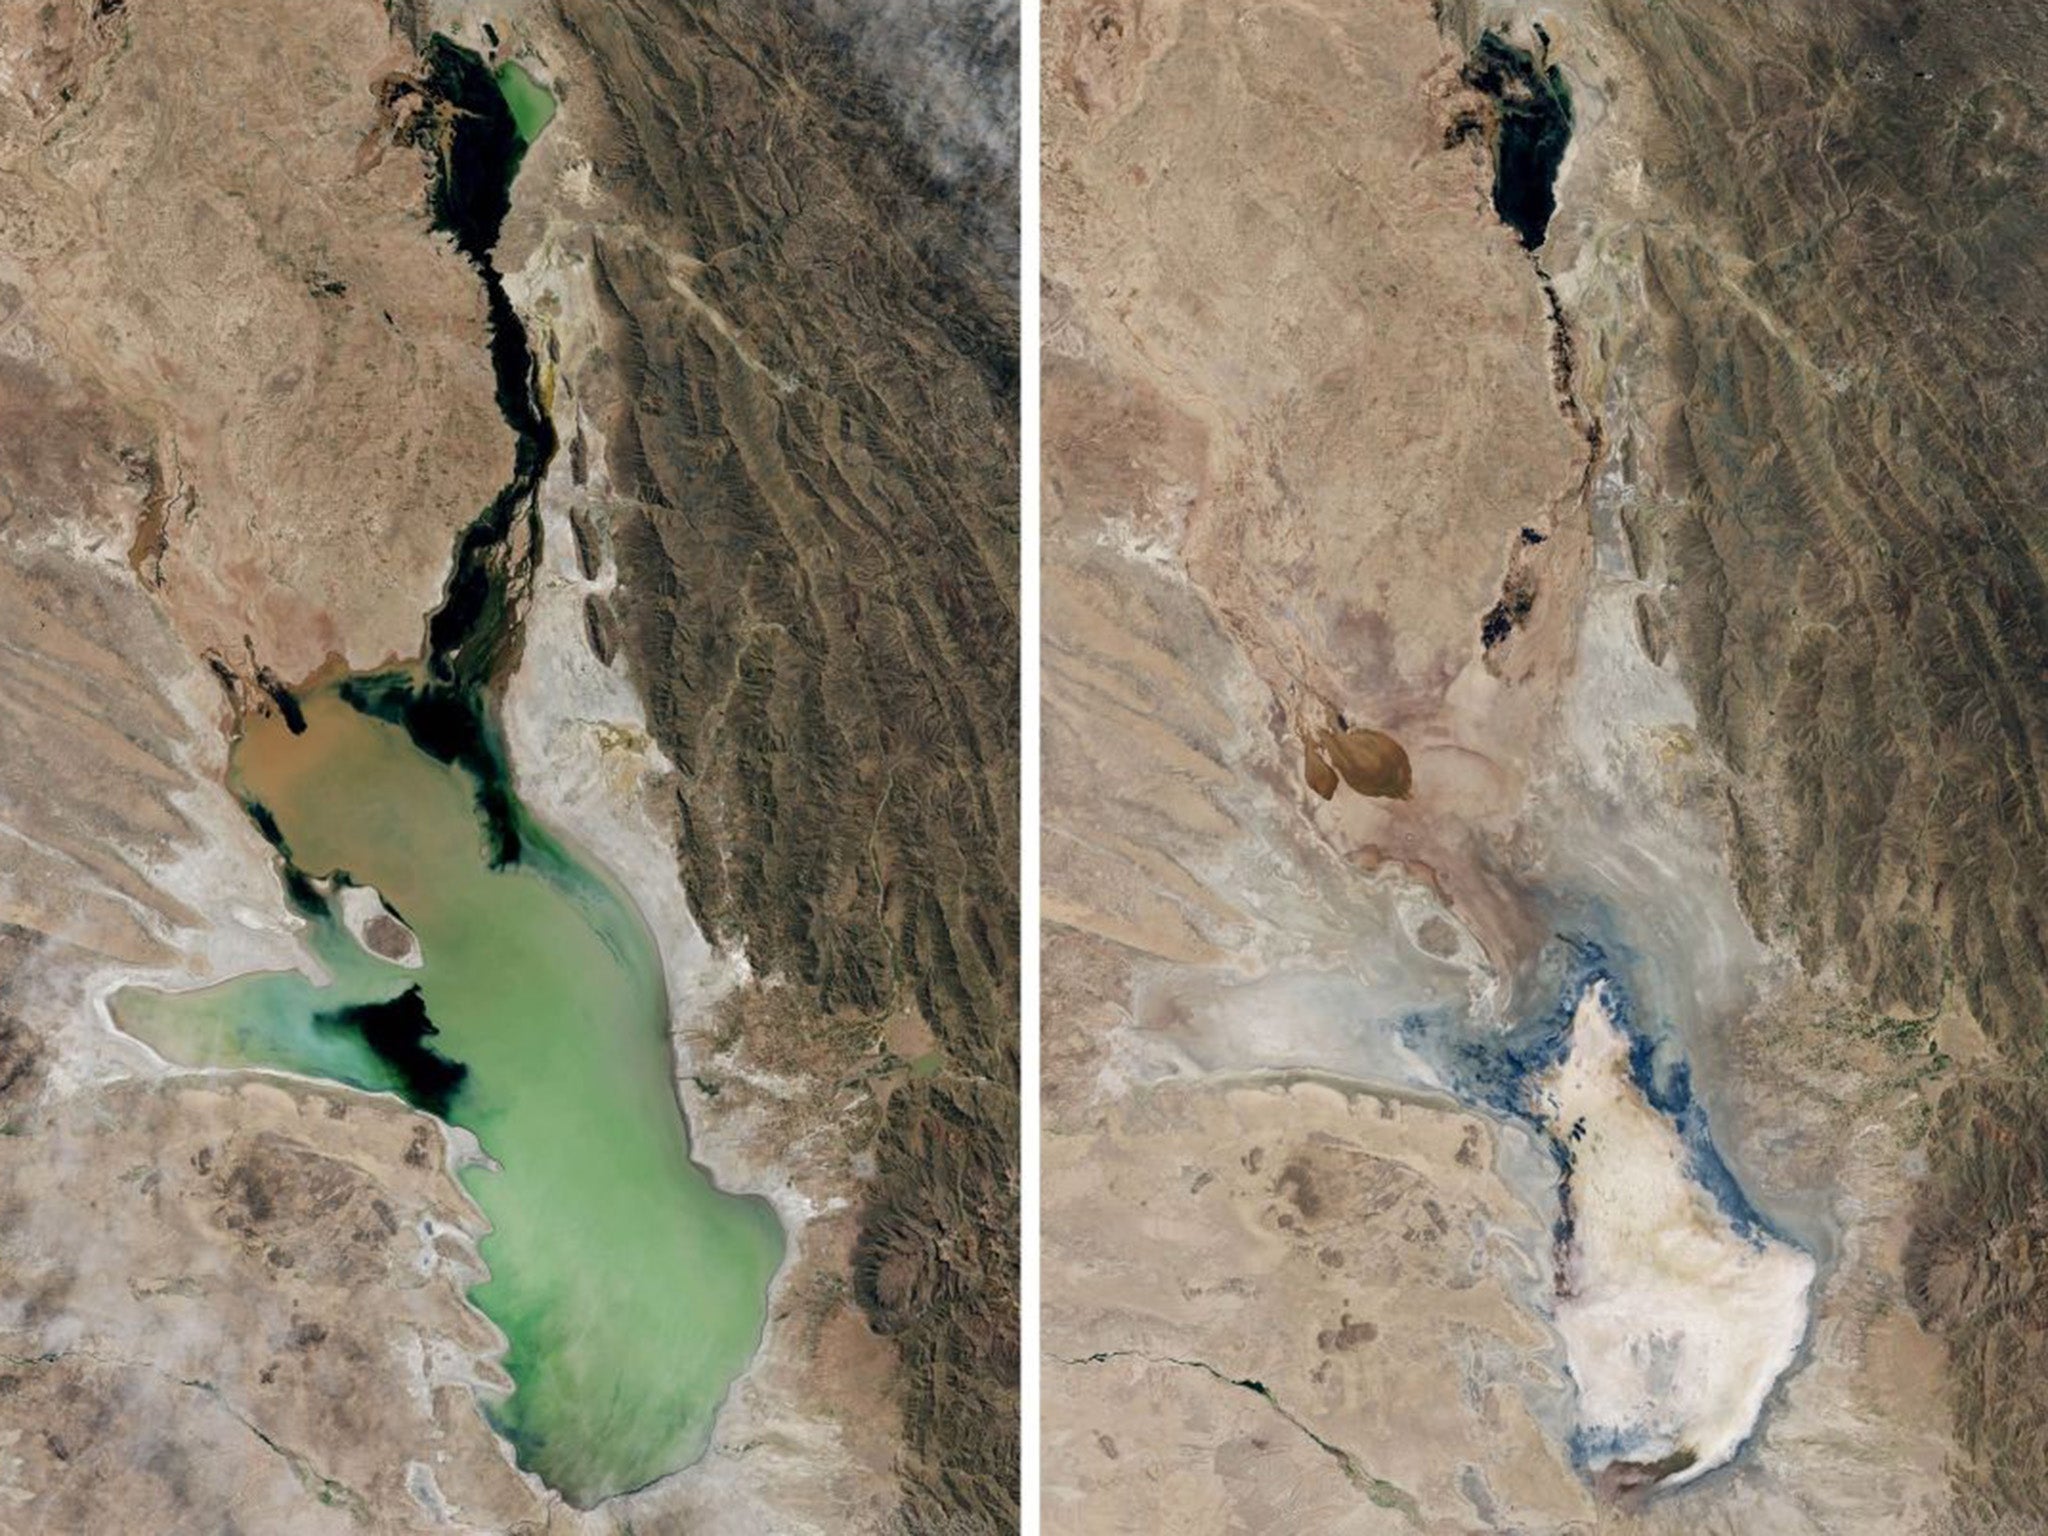 Satellite images show how much the waters around Lake Poopo have receded in just three years